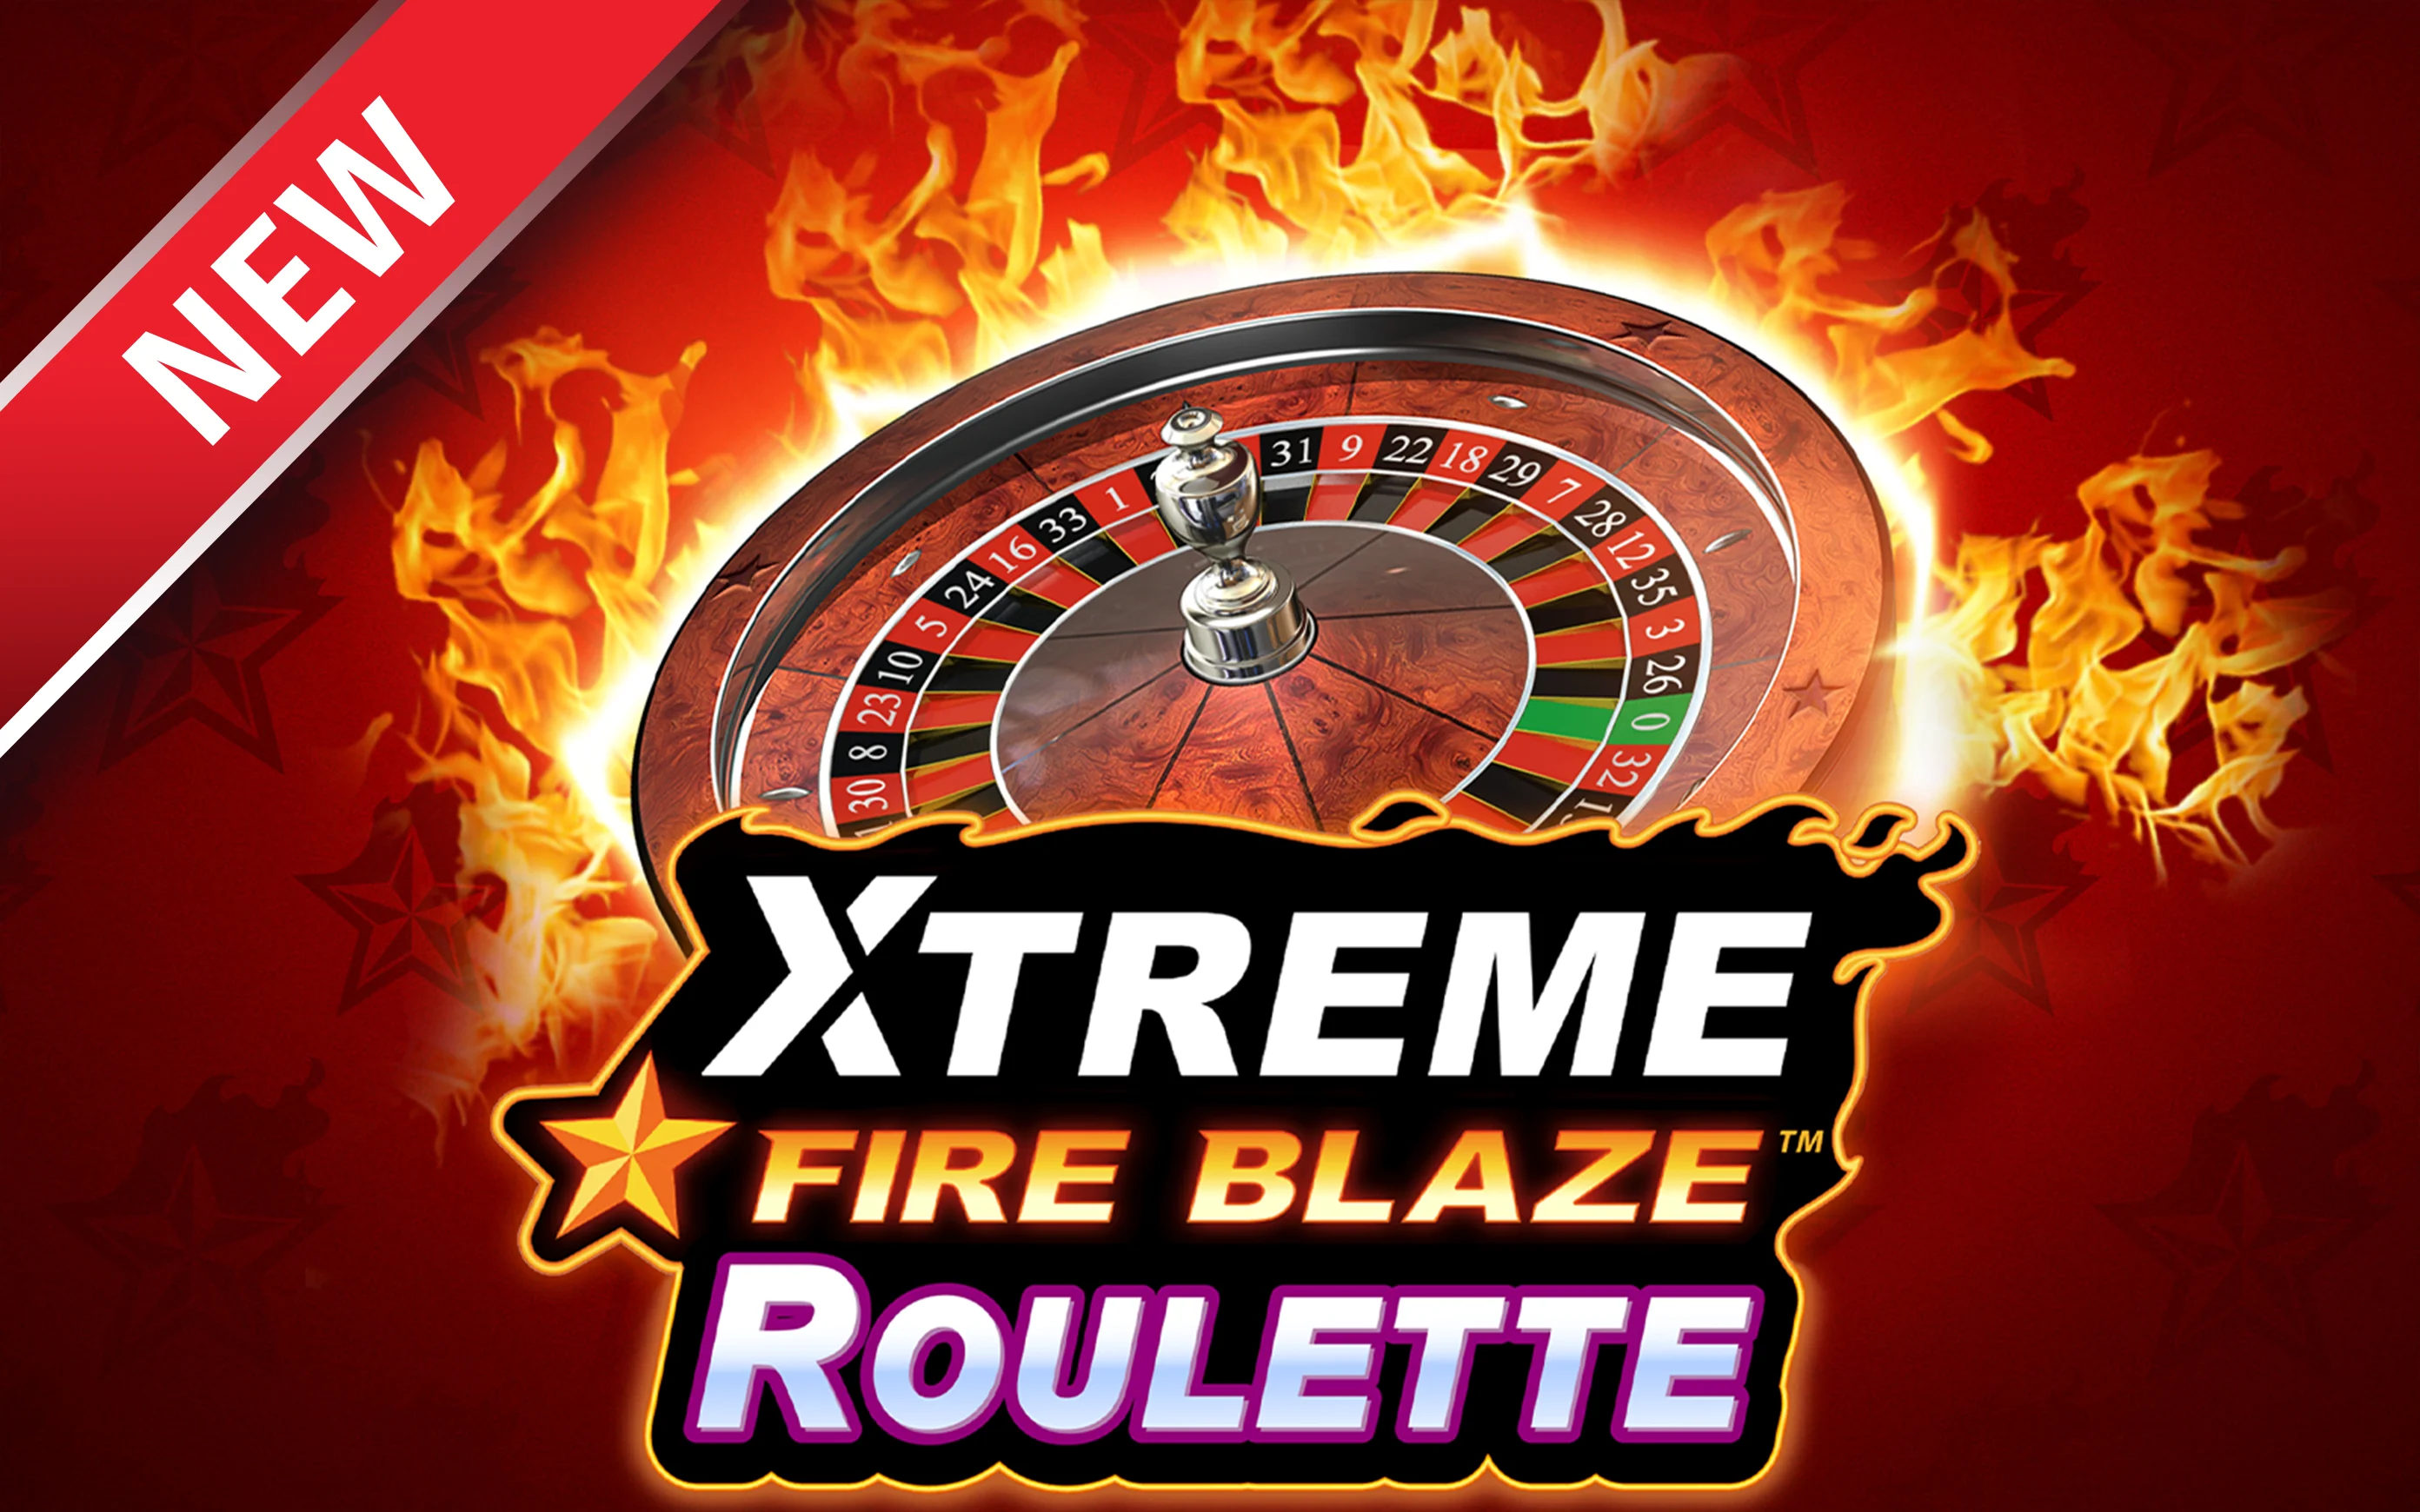 Play Xtreme Fire Blaze Roulette on Starcasino.be online casino